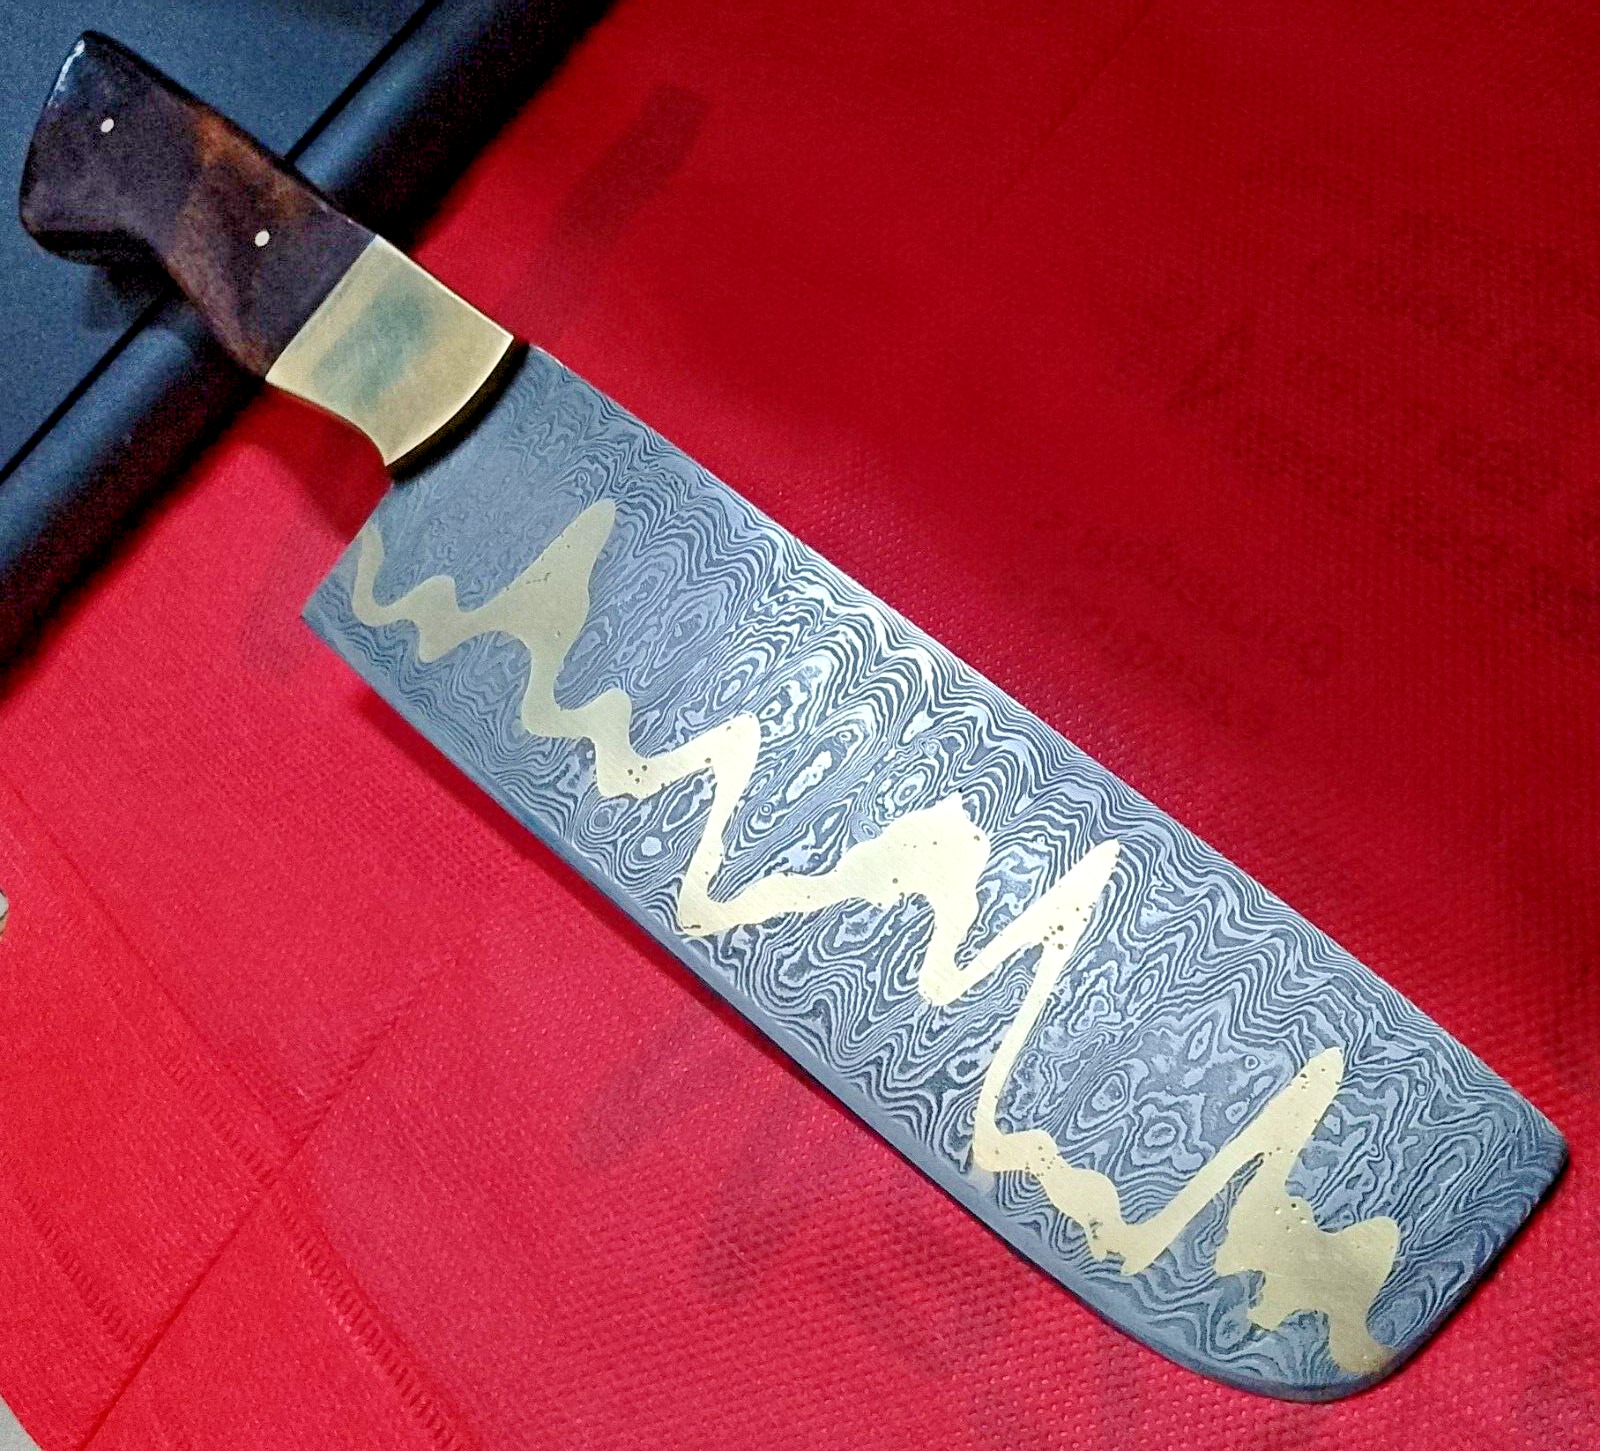 Custom Hand Made Damascus Steel Chopper Brass Added In Both Sides Of The Blade.